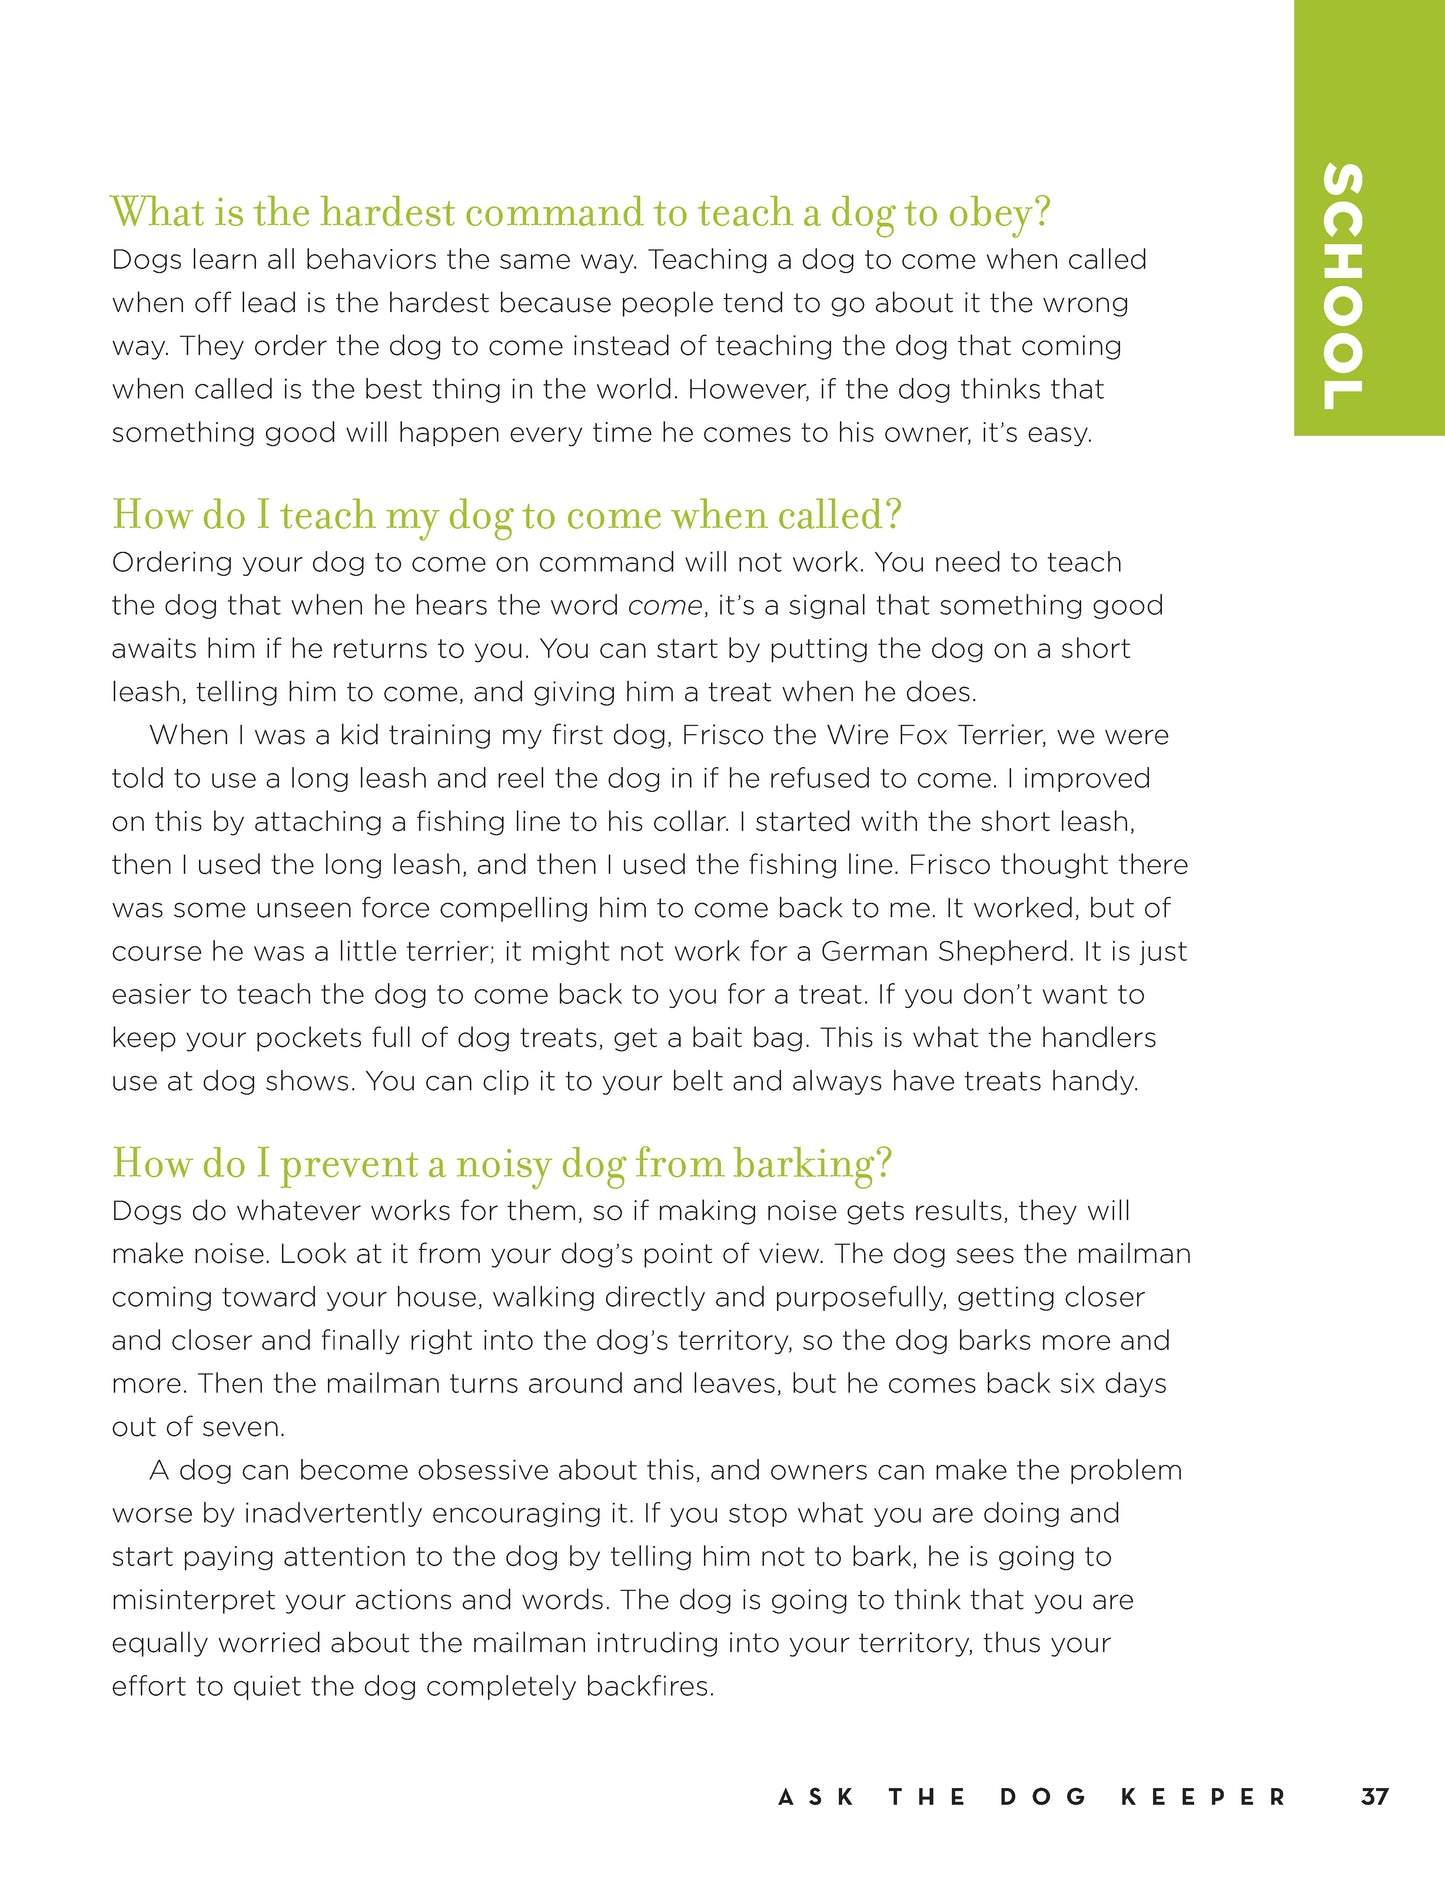 Marc Morrone's Ask the Dog Keeper